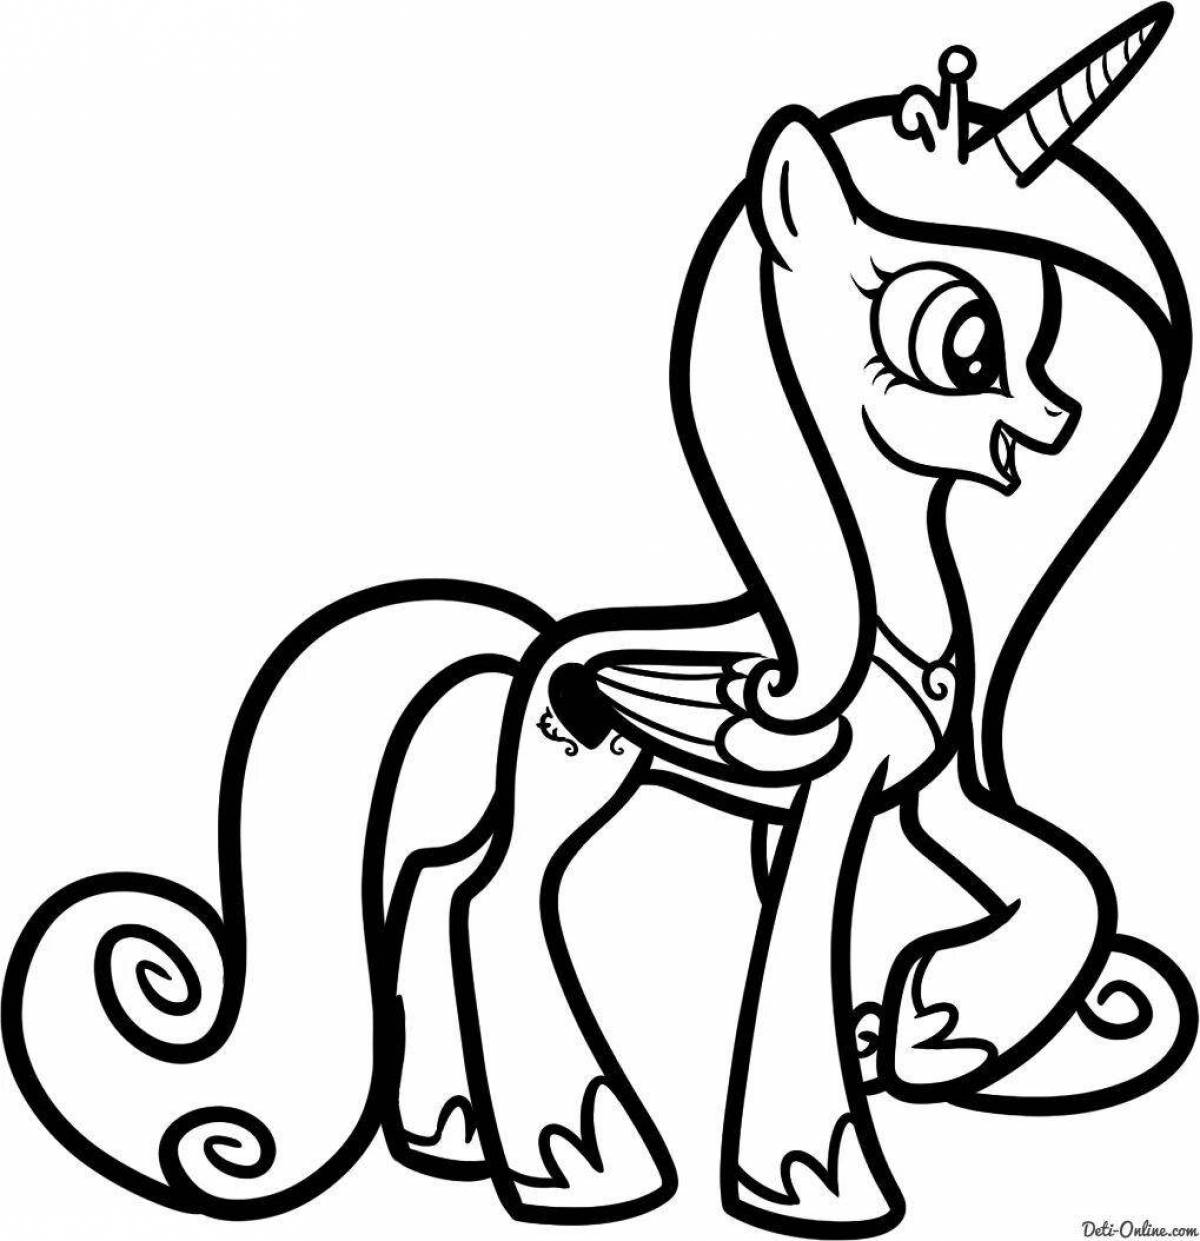 Color-luminous cadence coloring page